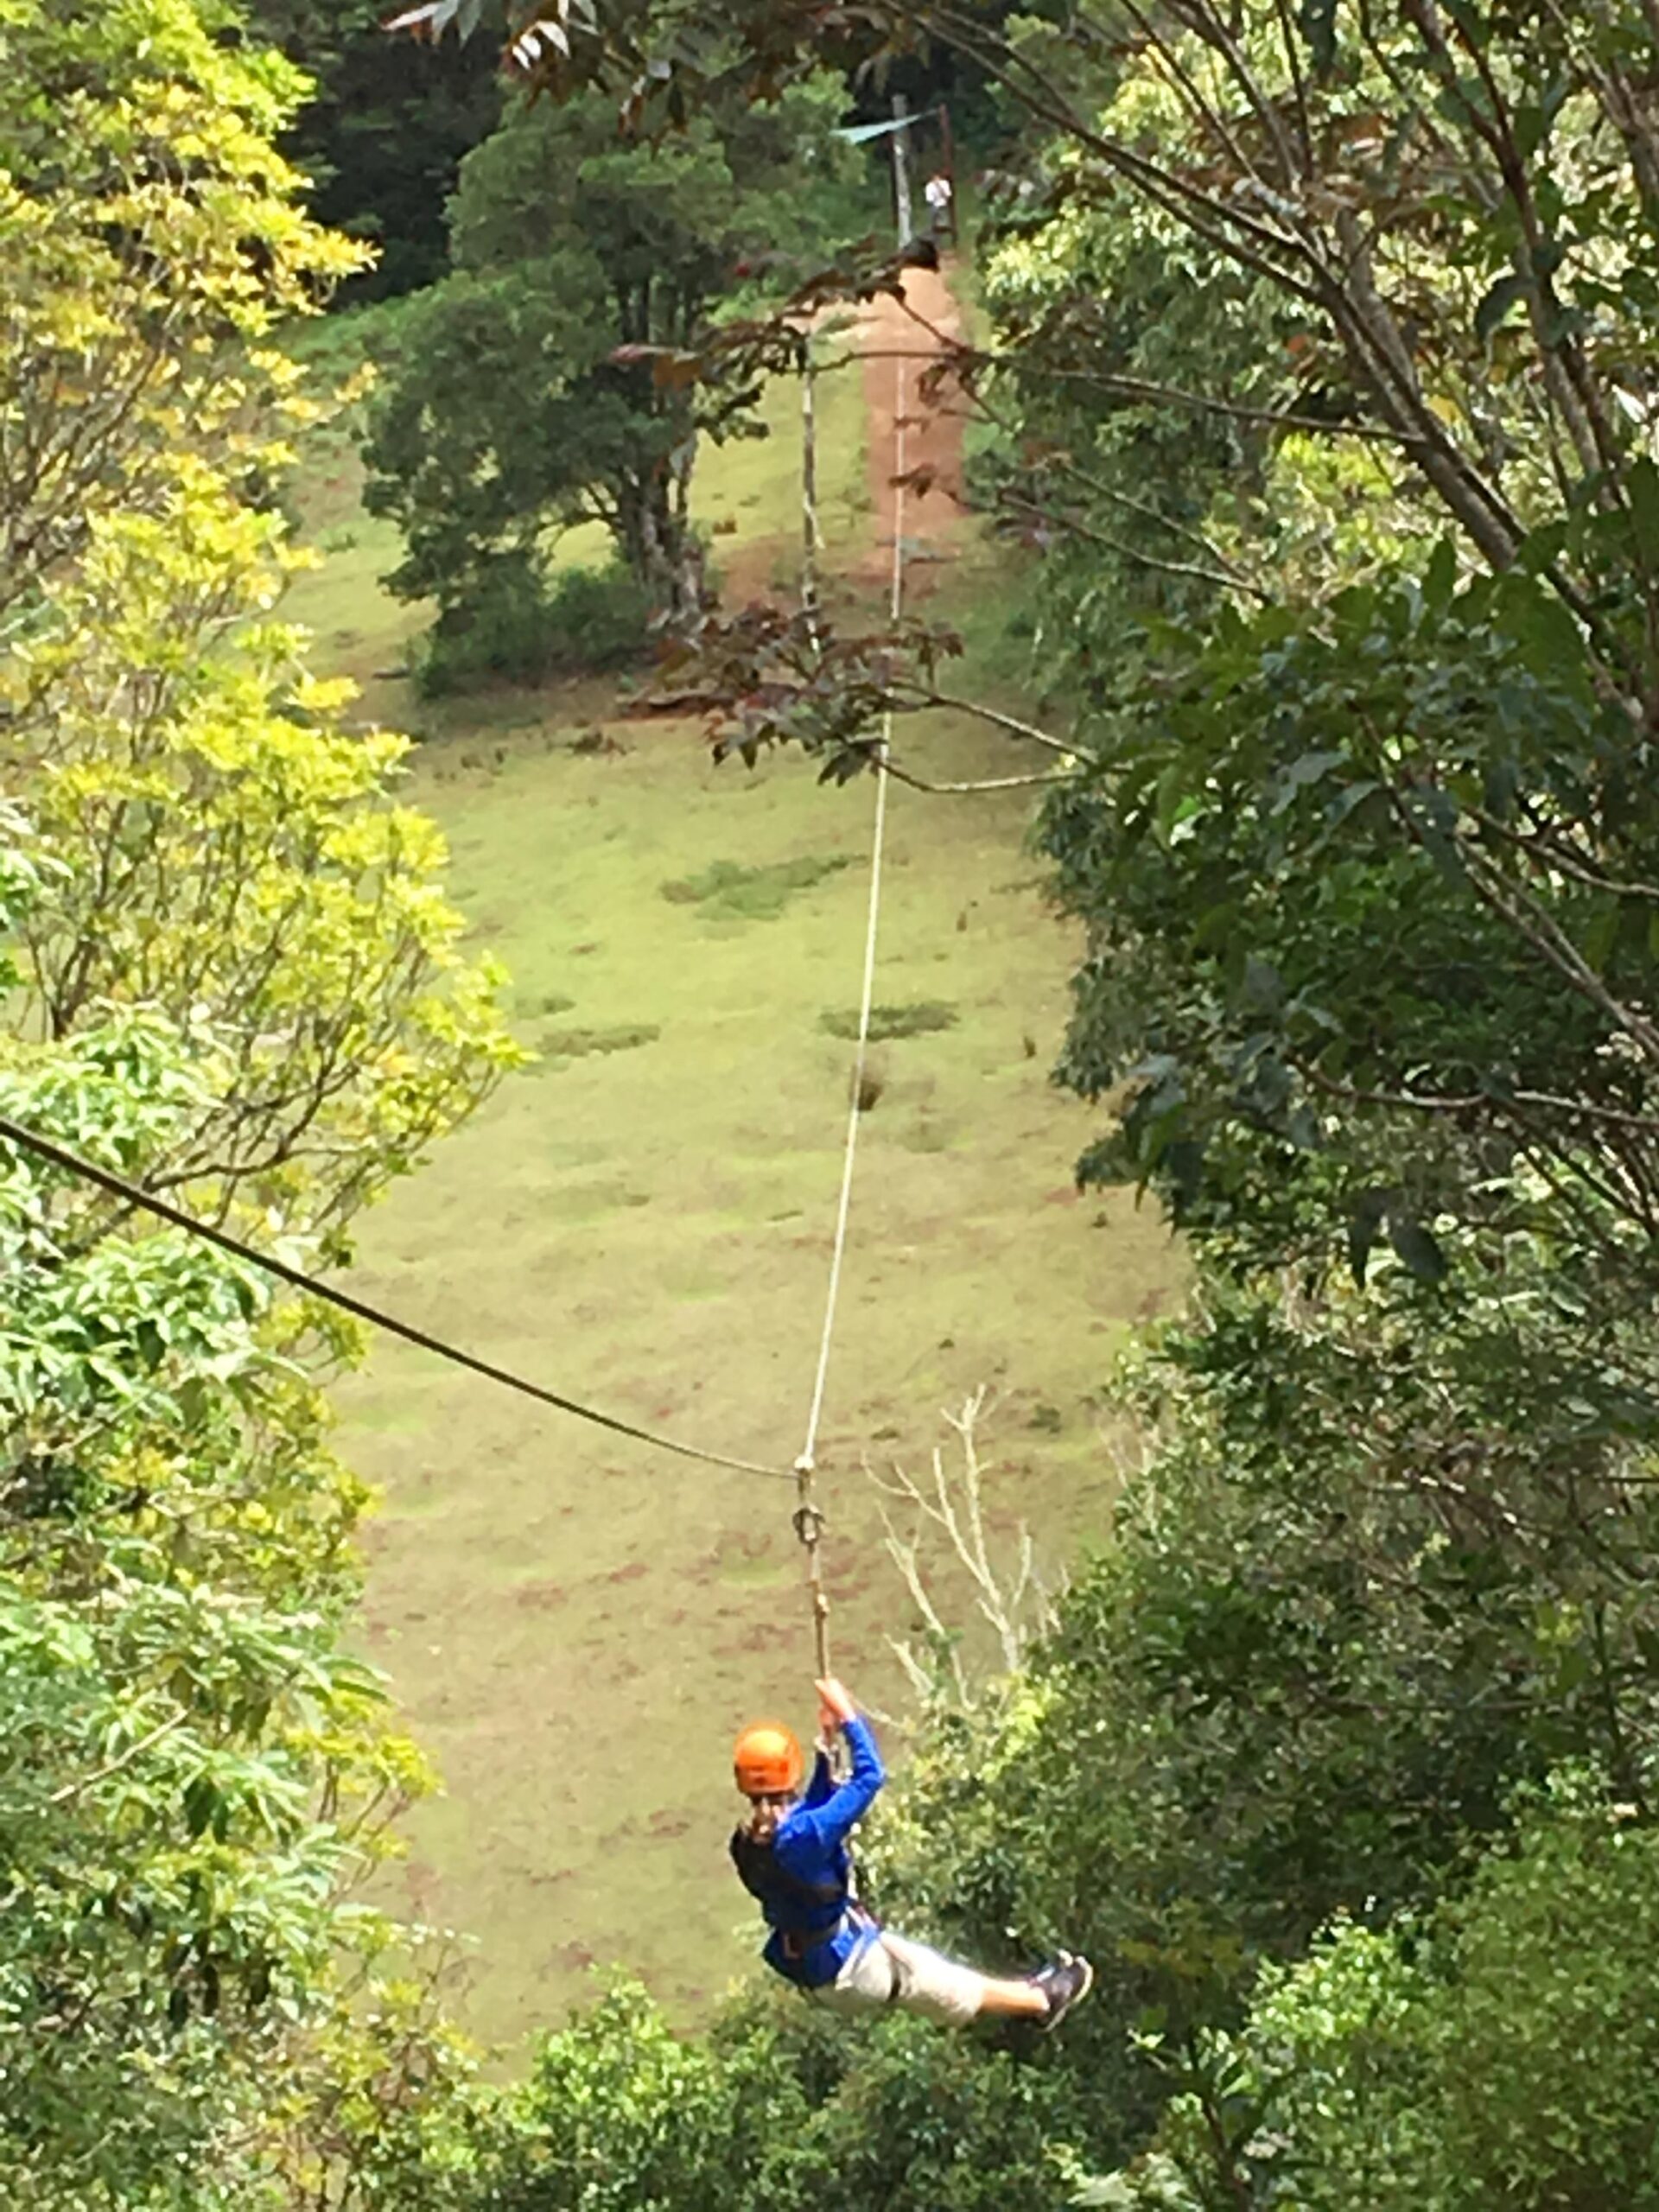 Traveling down O'Reilly's Zip-line course in Lamington National Park - Photo by Allen Rieland